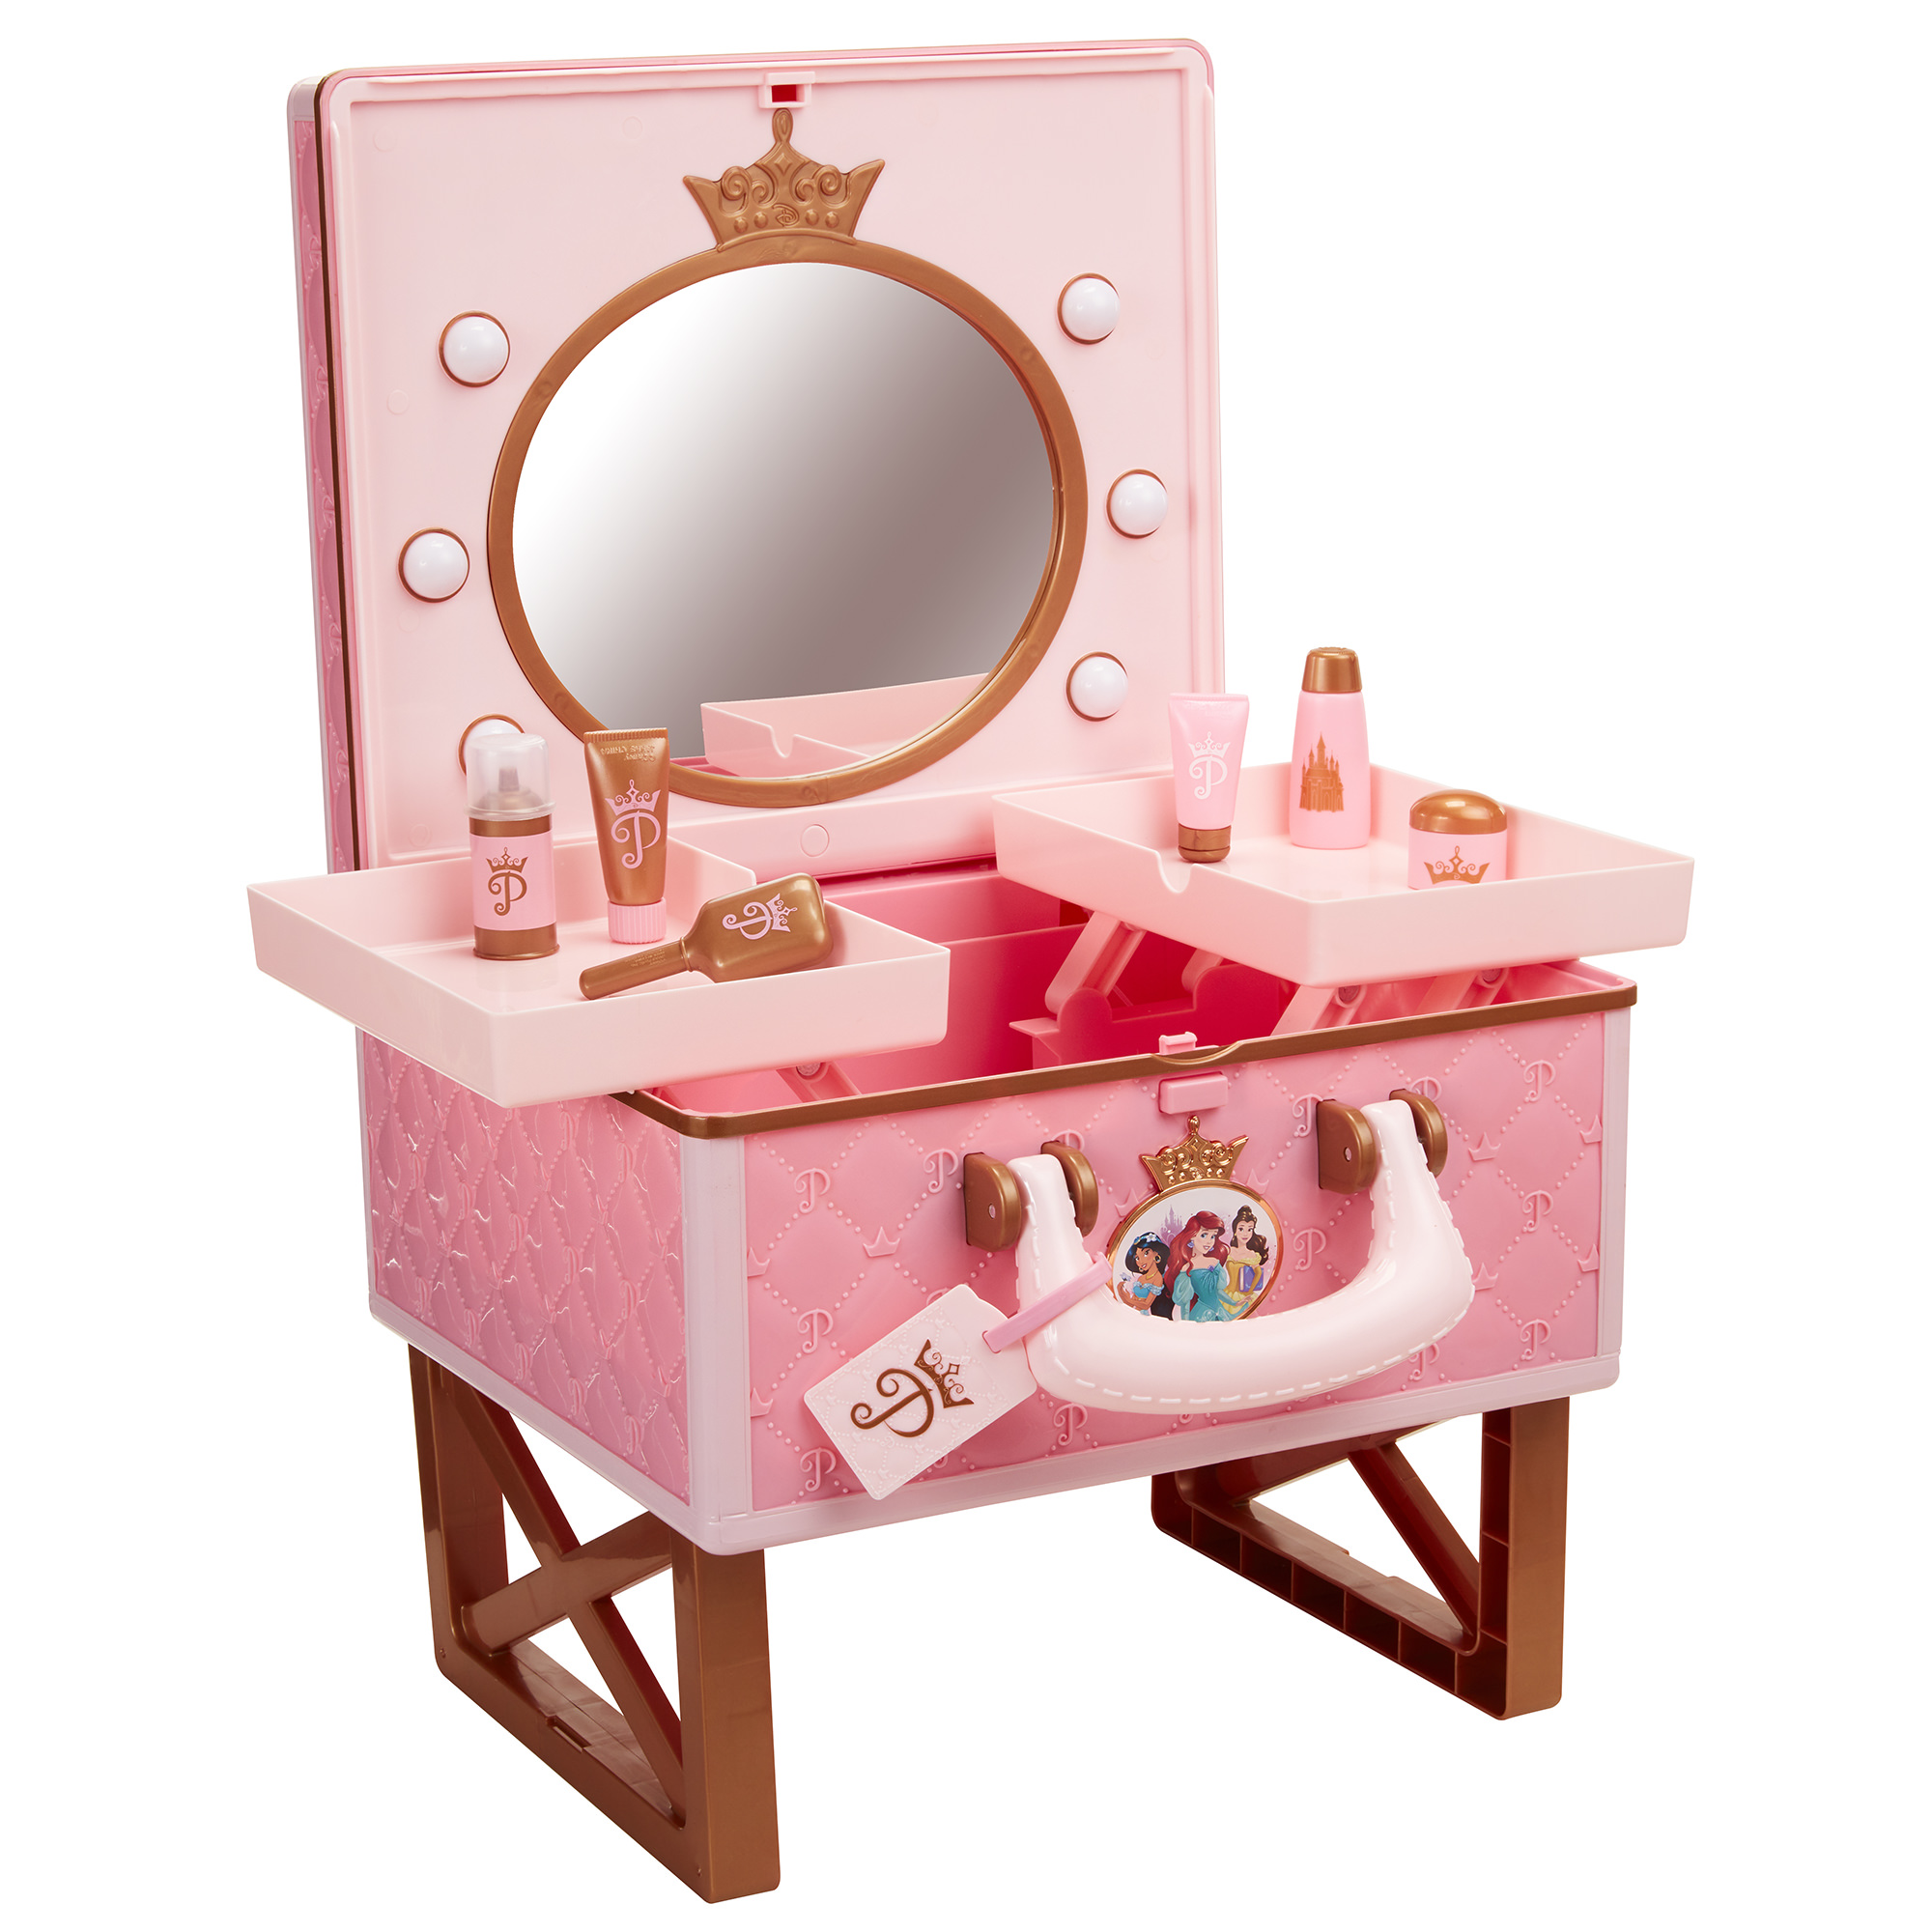 Disney Princess Style Collection Travel Vanity Doll Accessories, 7 Pieces - image 1 of 7